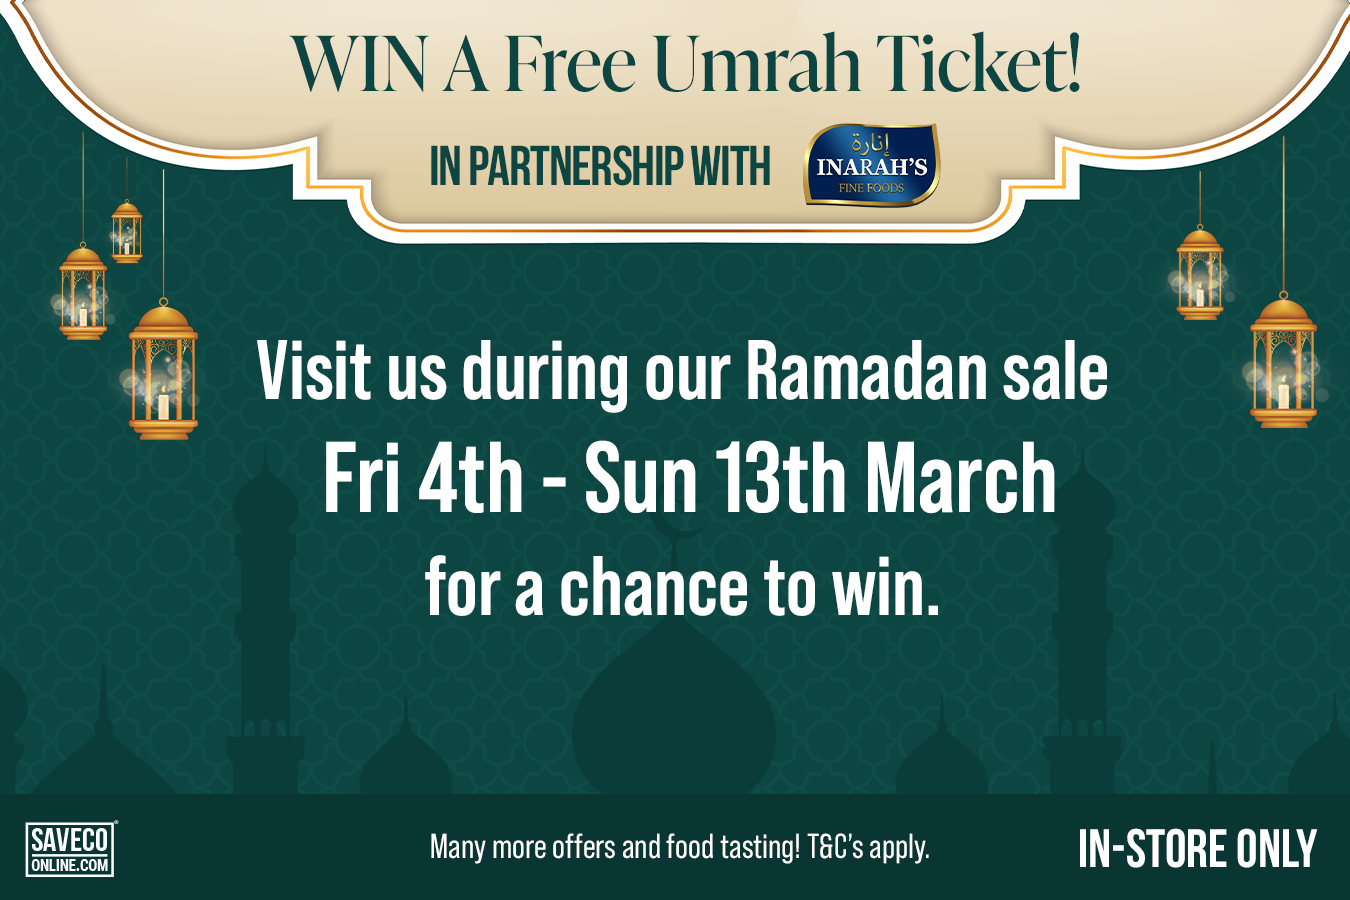 Win An Umrah Ticket In-Store!